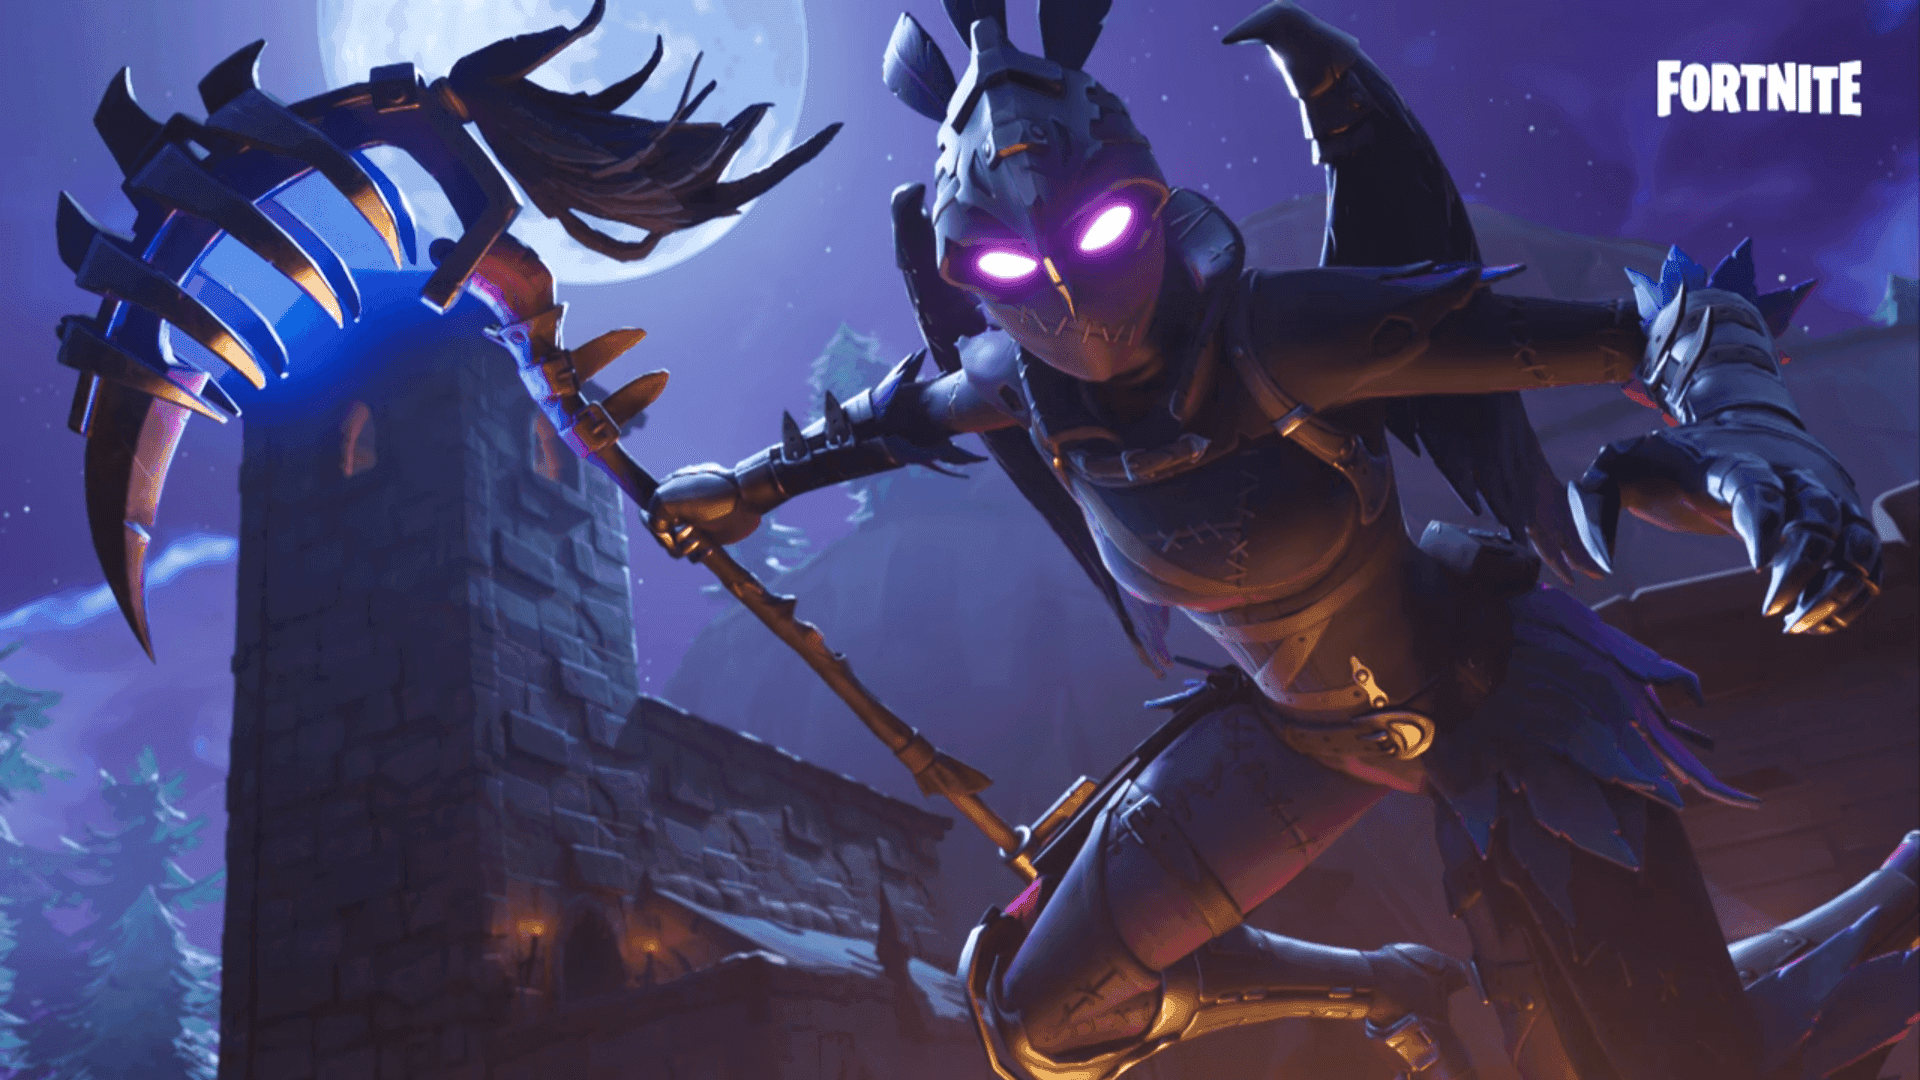 Raven, the mysterious Fortnite character Wallpaper